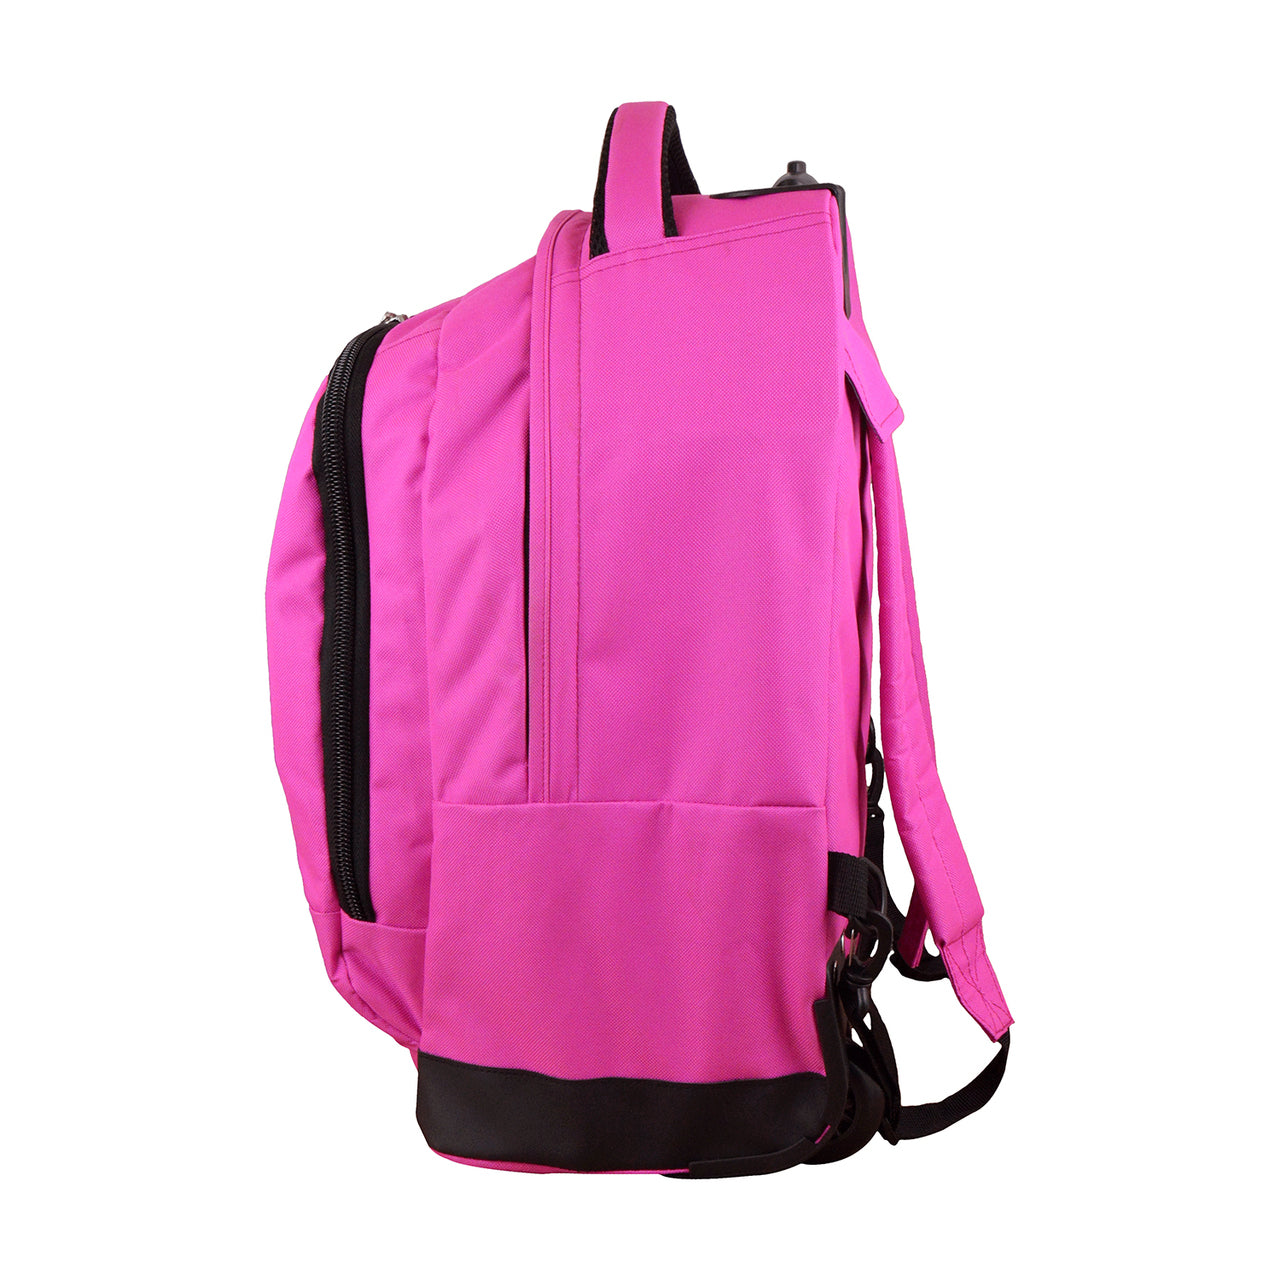 Oklahoma State Premium Wheeled Backpack in Pink